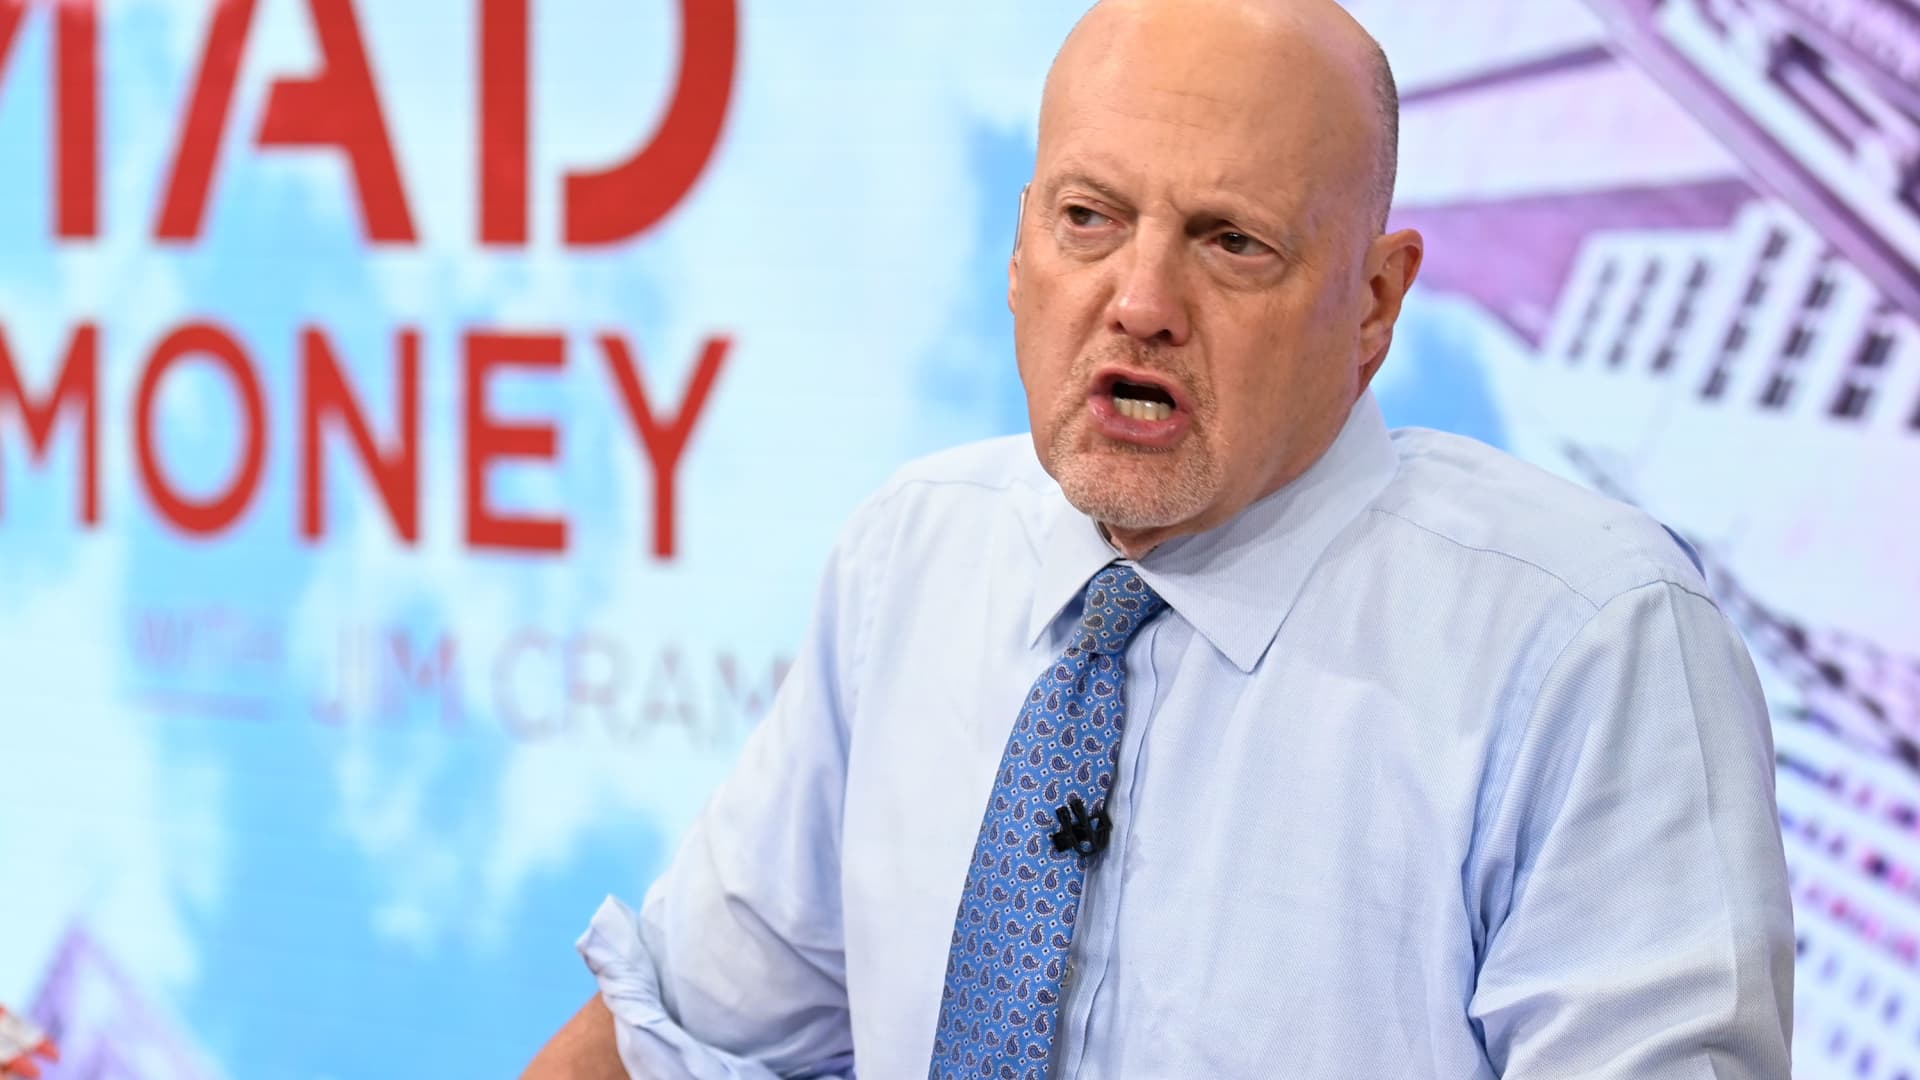 Jim Cramer's Investing Club meeting Monday: Fed and jobs, China reopening, Eli Lilly